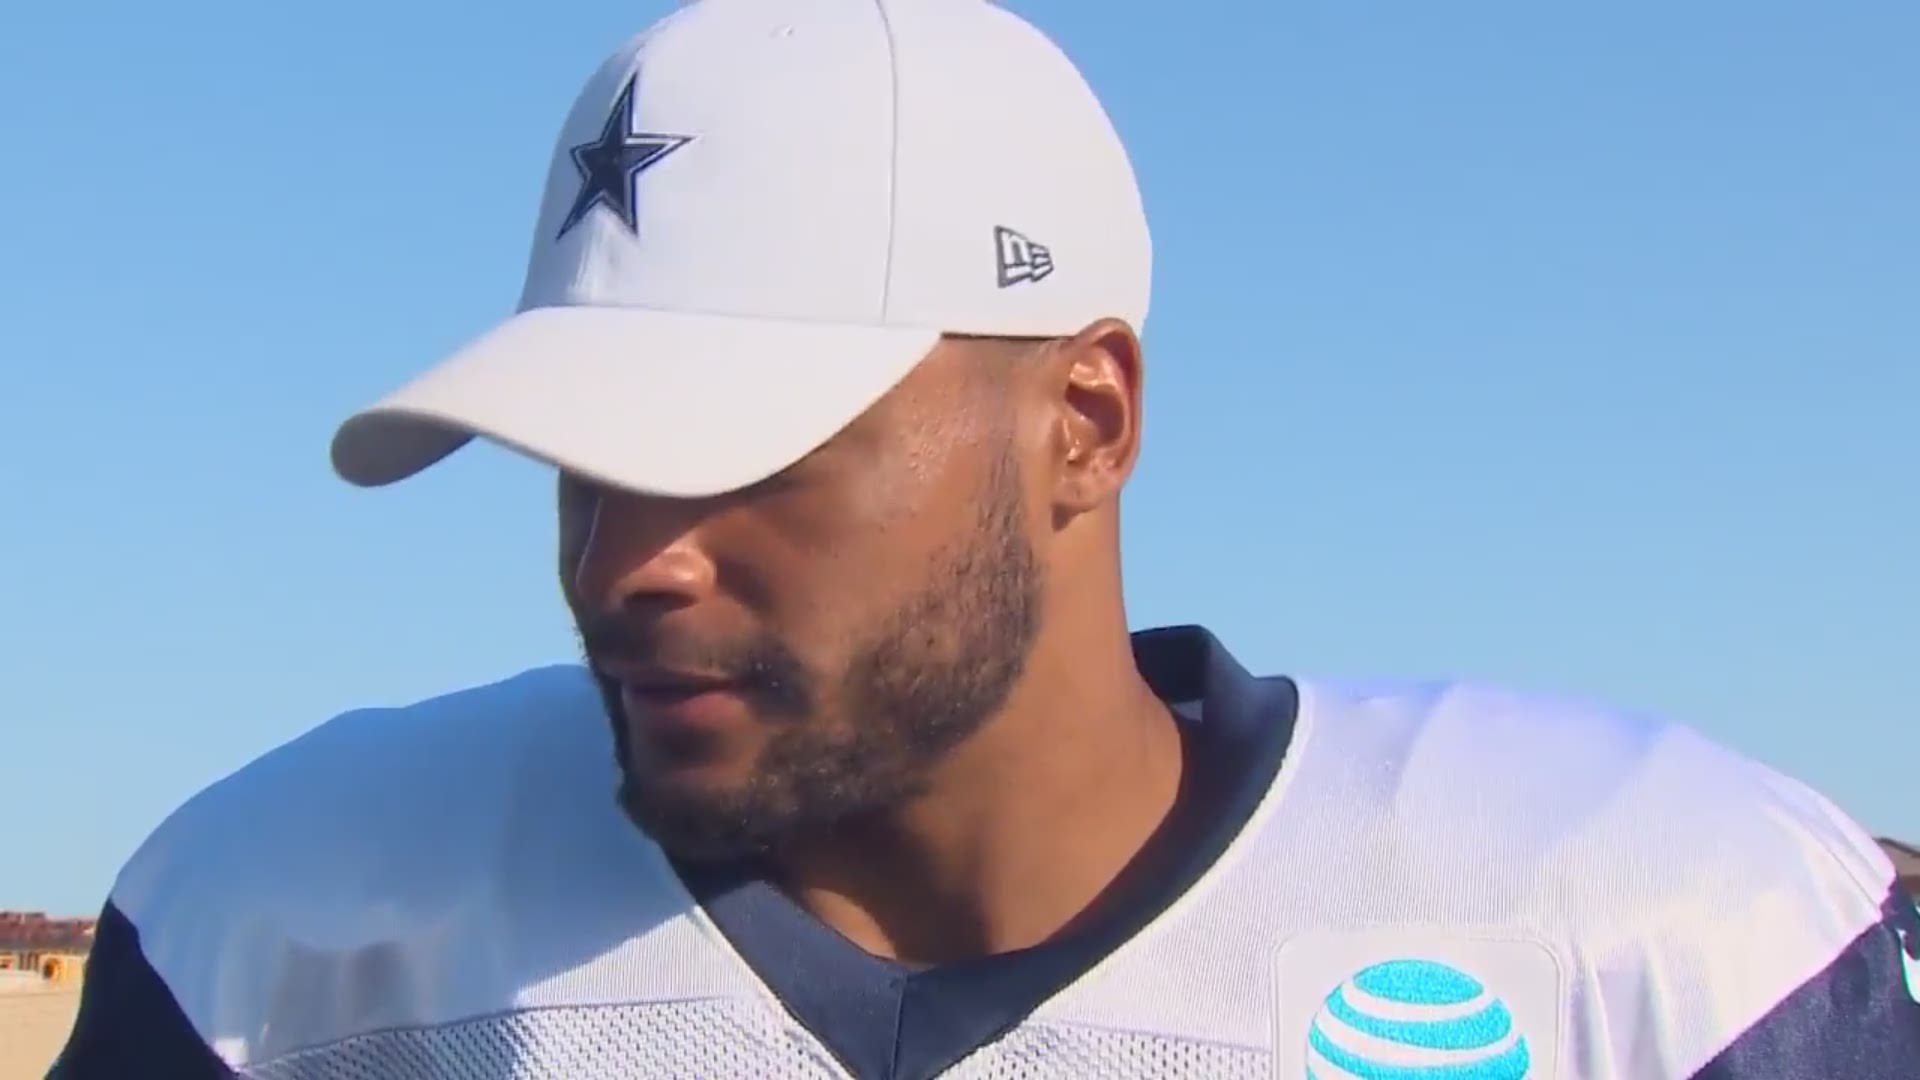 Dak Prescott weighs in on the reaction to his anthem comments and a mural in Dallas depicting him as a character from 'Get Out.' WFAA